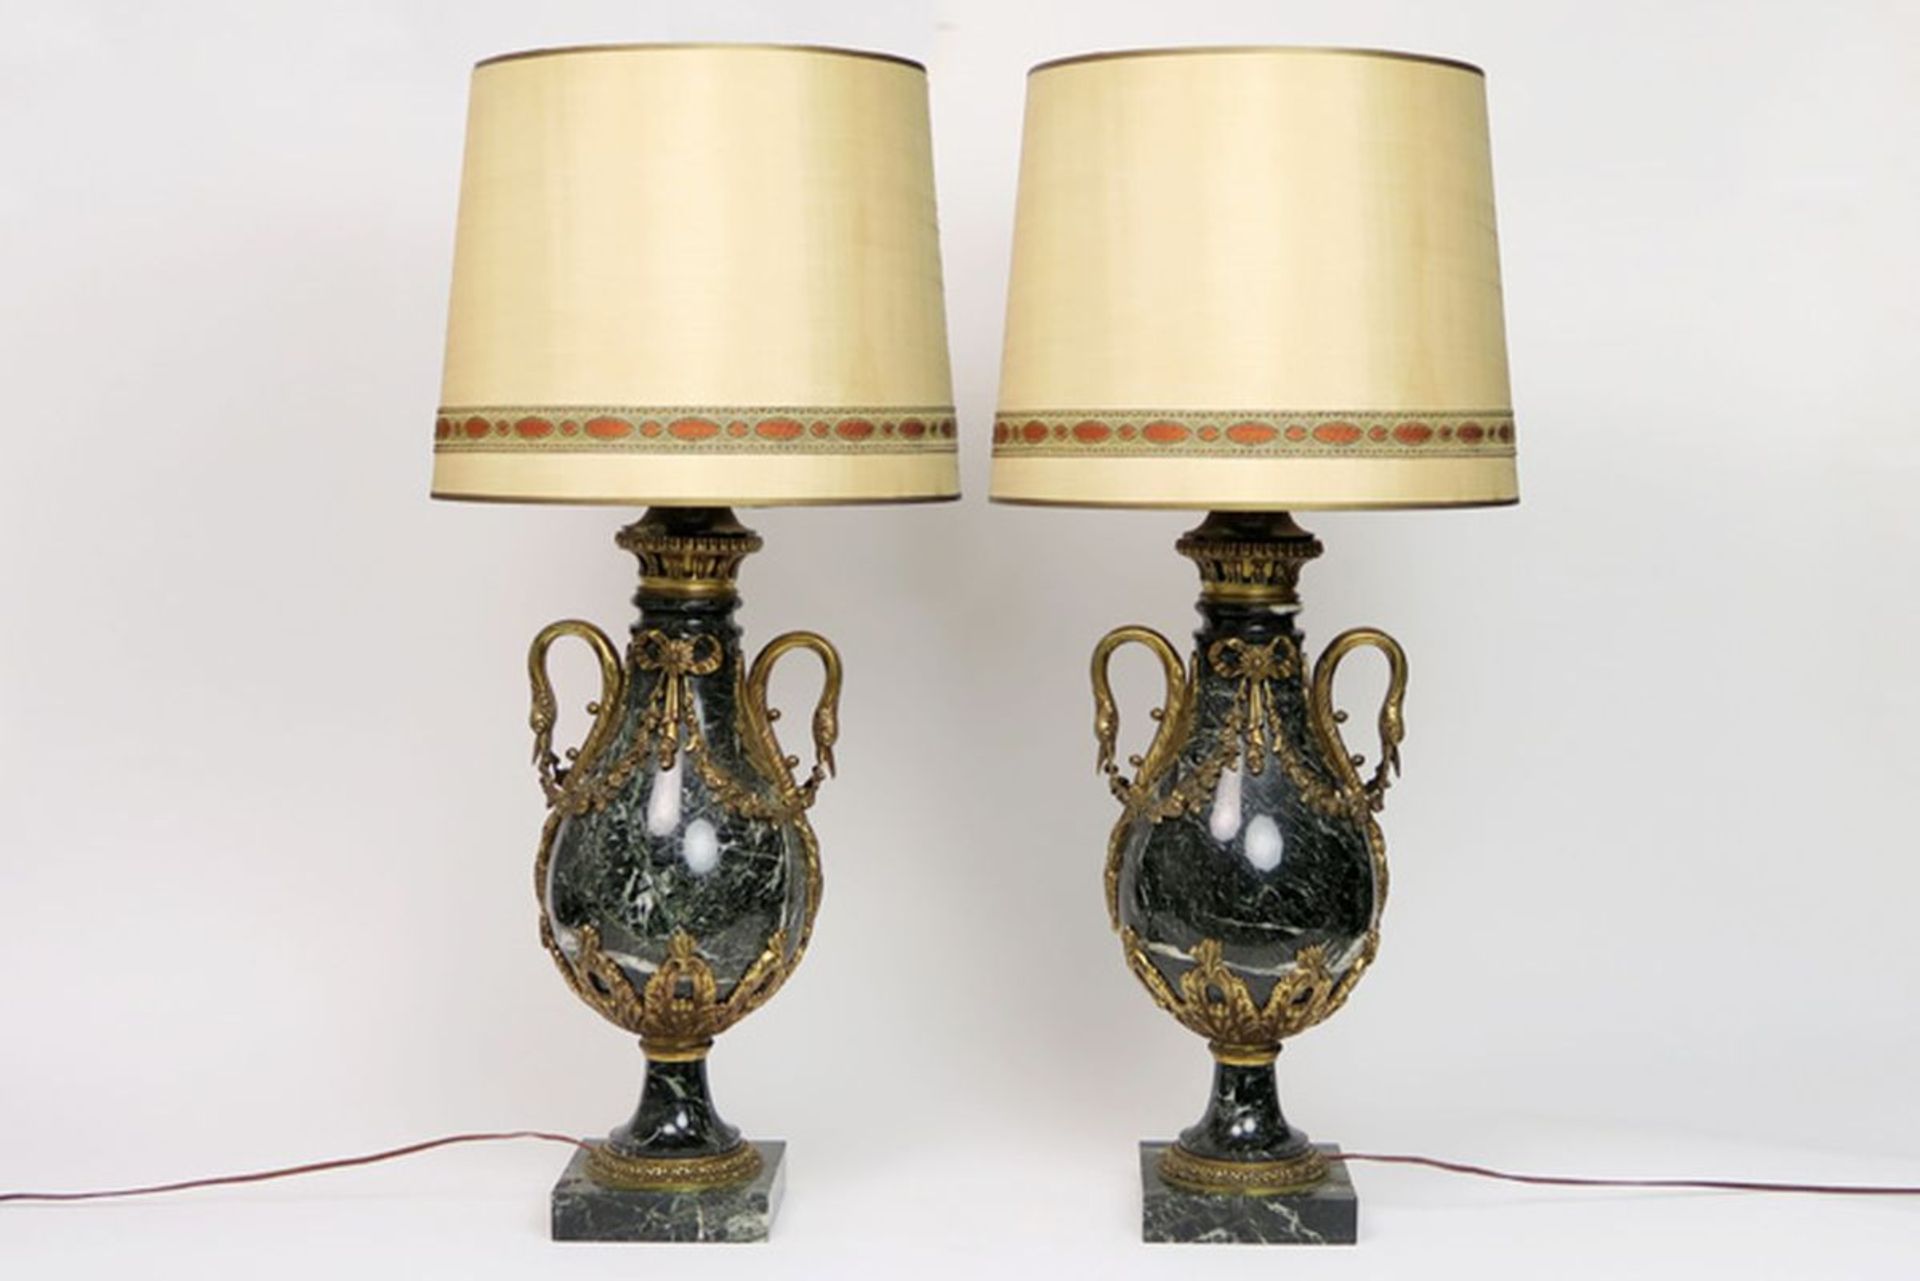 pair of antique neoclassical vases in marble and bronze - made into lamps - - Paar [...] - Image 2 of 3